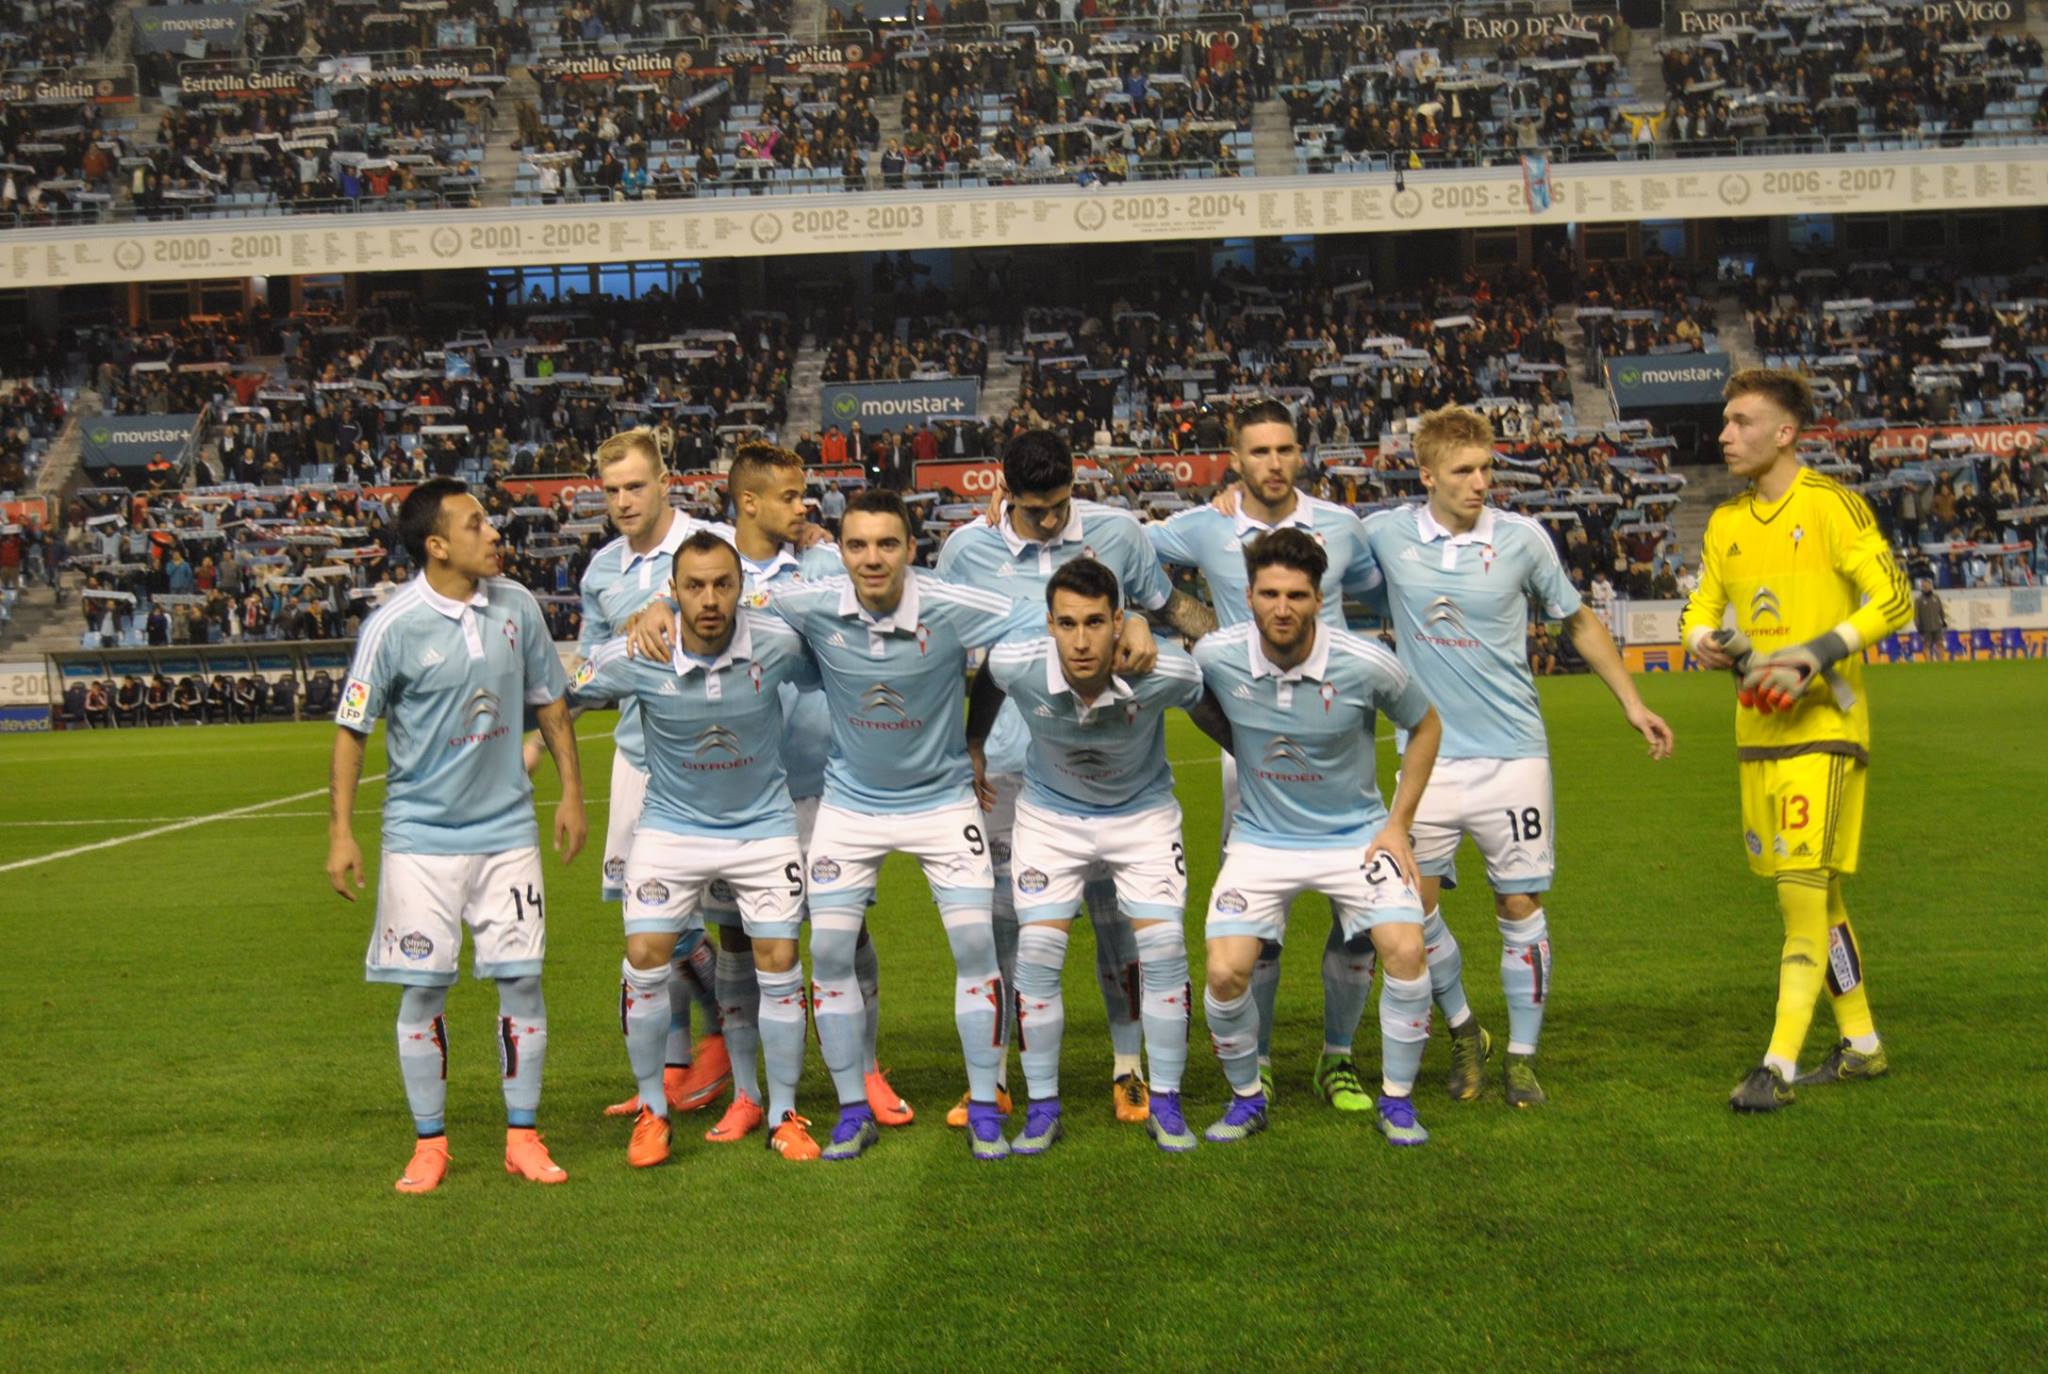 Will Celta de Vigo be able to bounce back after last weekend's major setback?